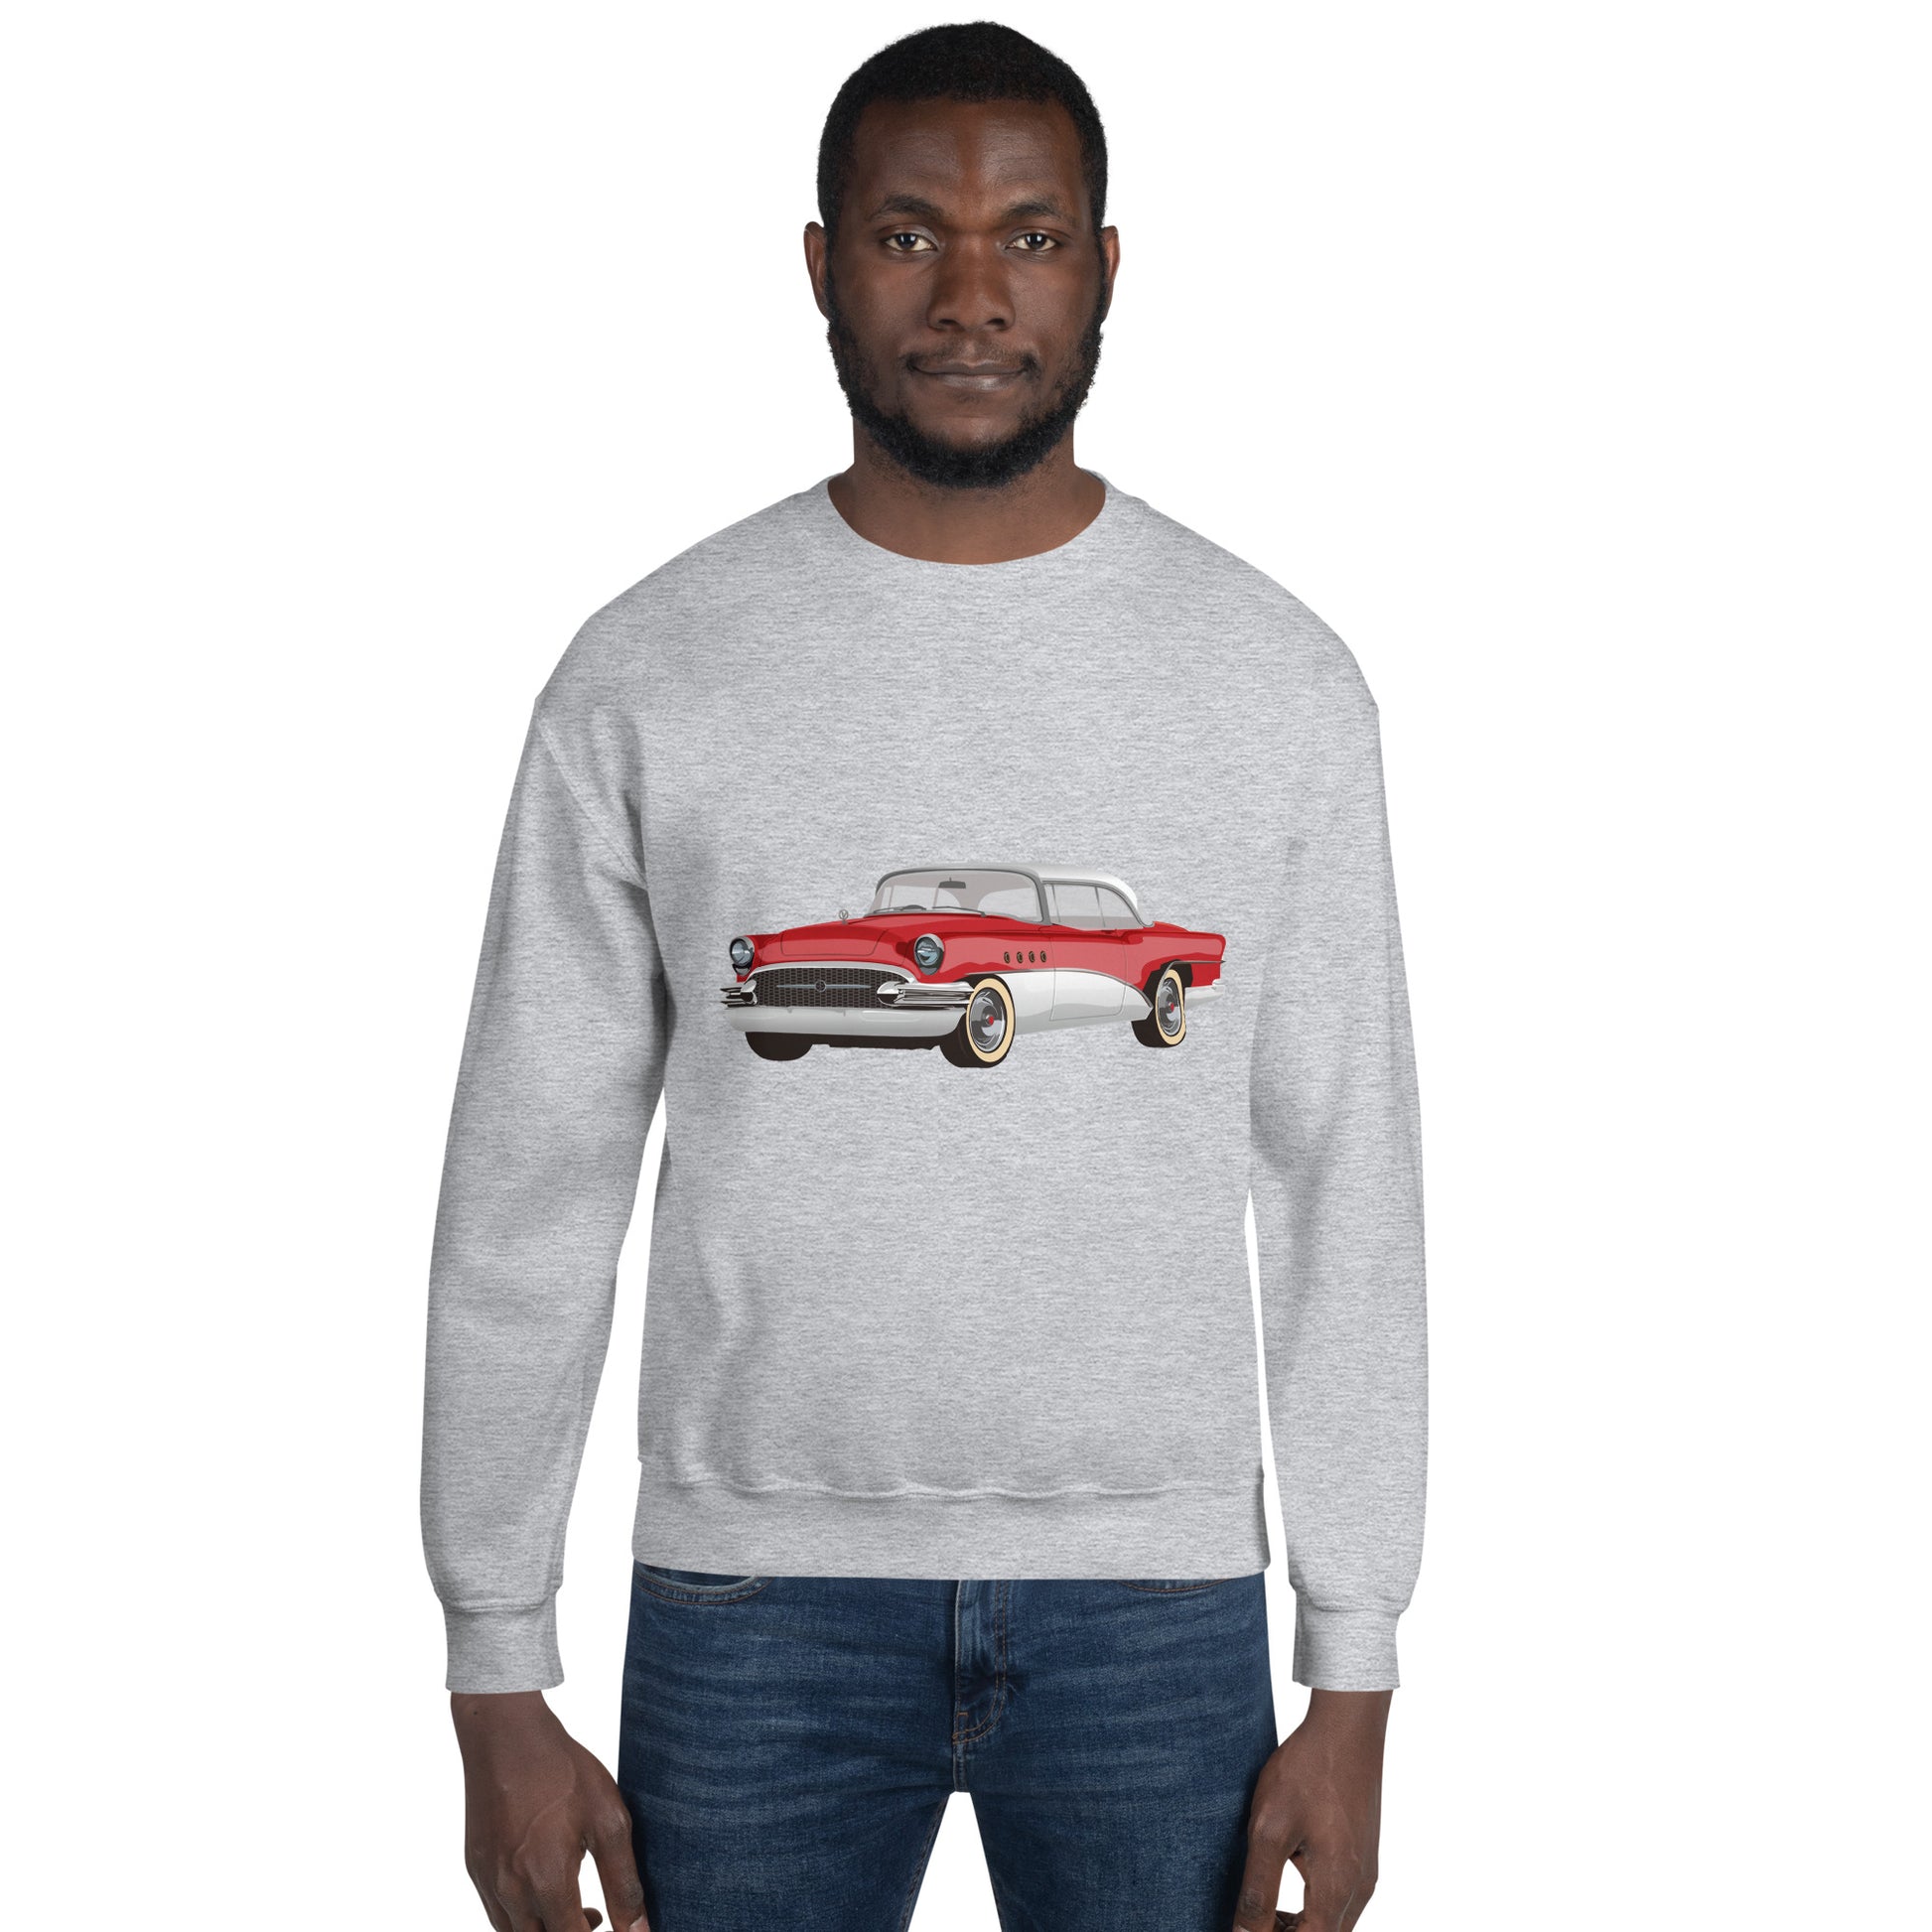 Man with sport grey sweatshirt with red chevrolet